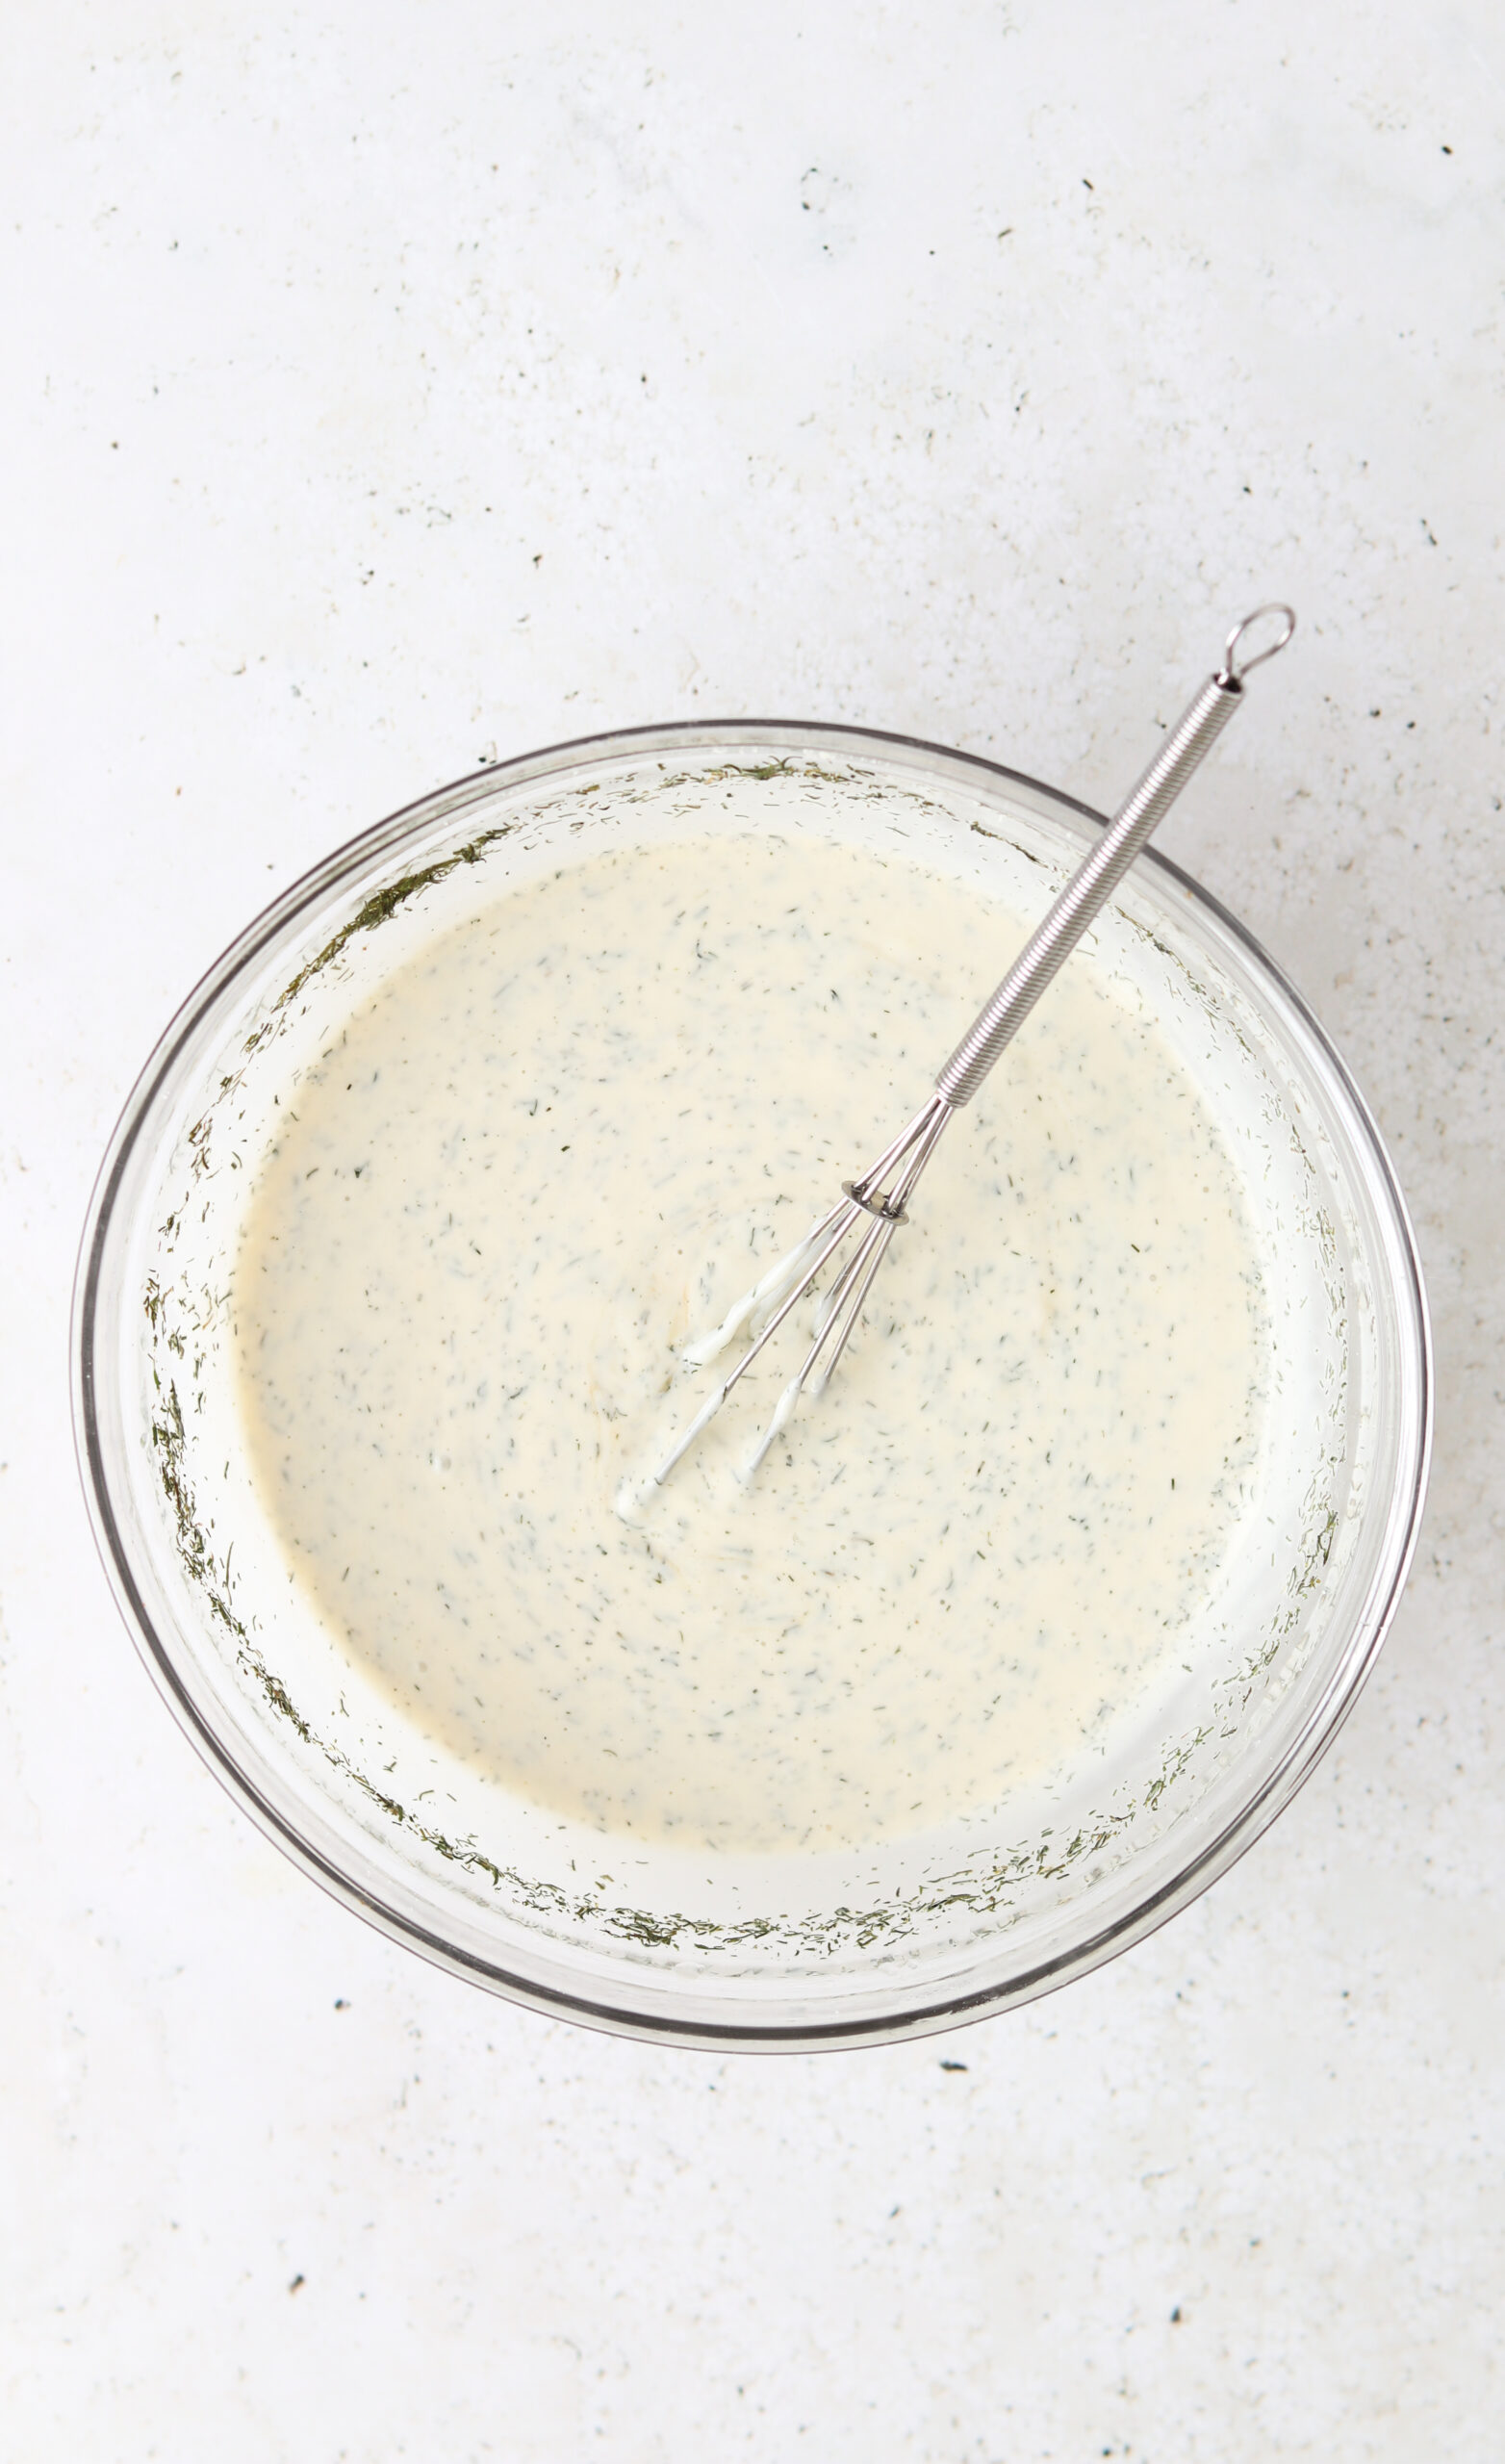 Dill aioli mixed together in a glass mixing bowl.